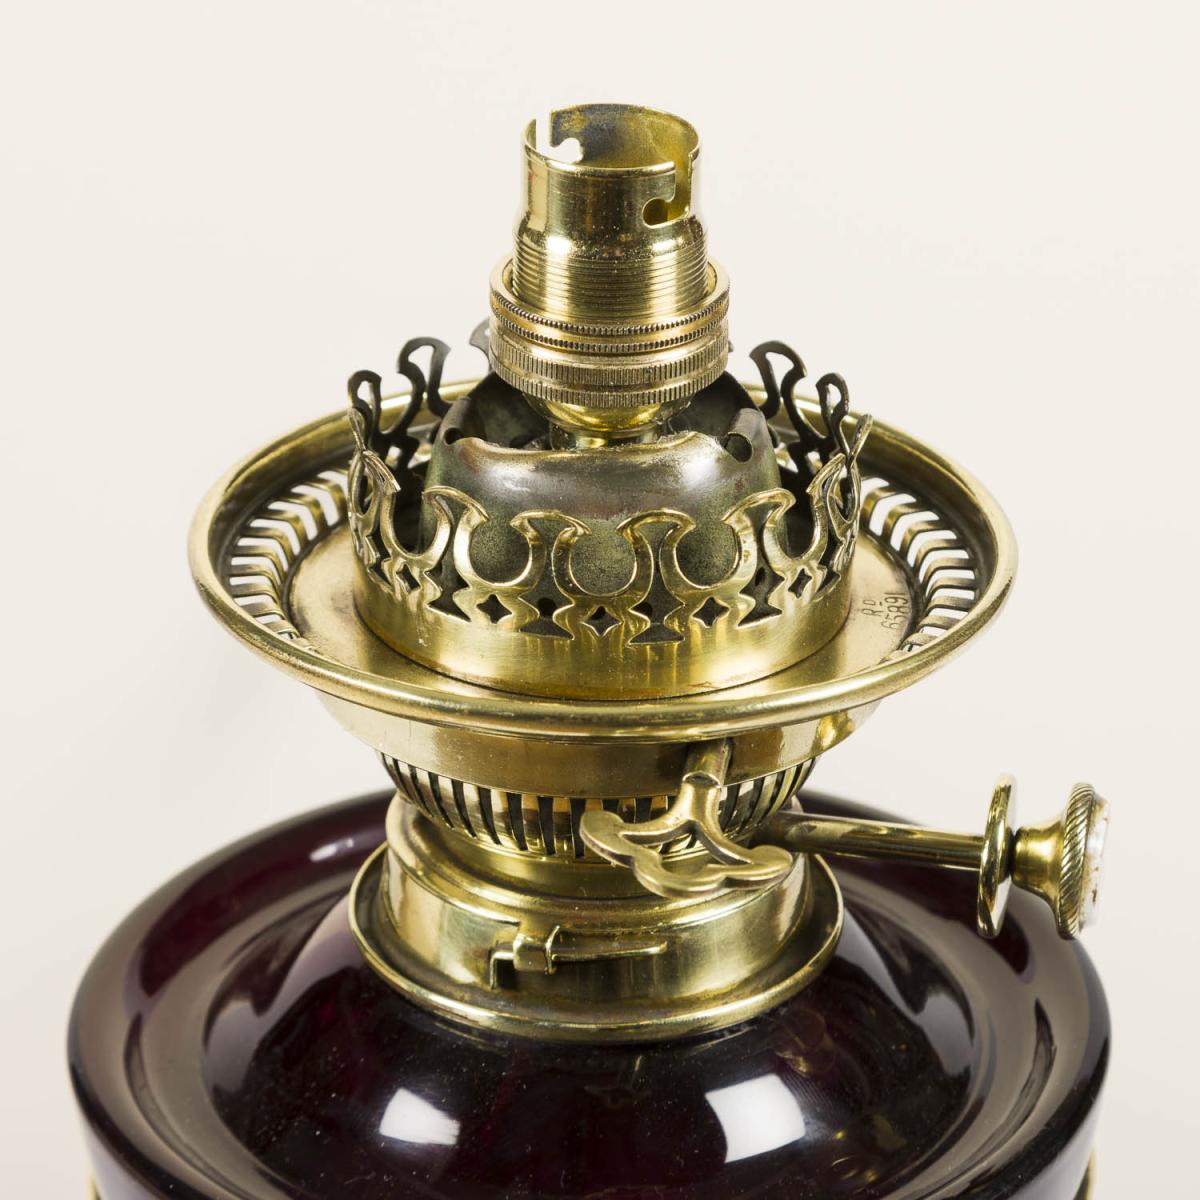 Wall mounted oil lamp, converted to electricity, Hinks, circa 1890.